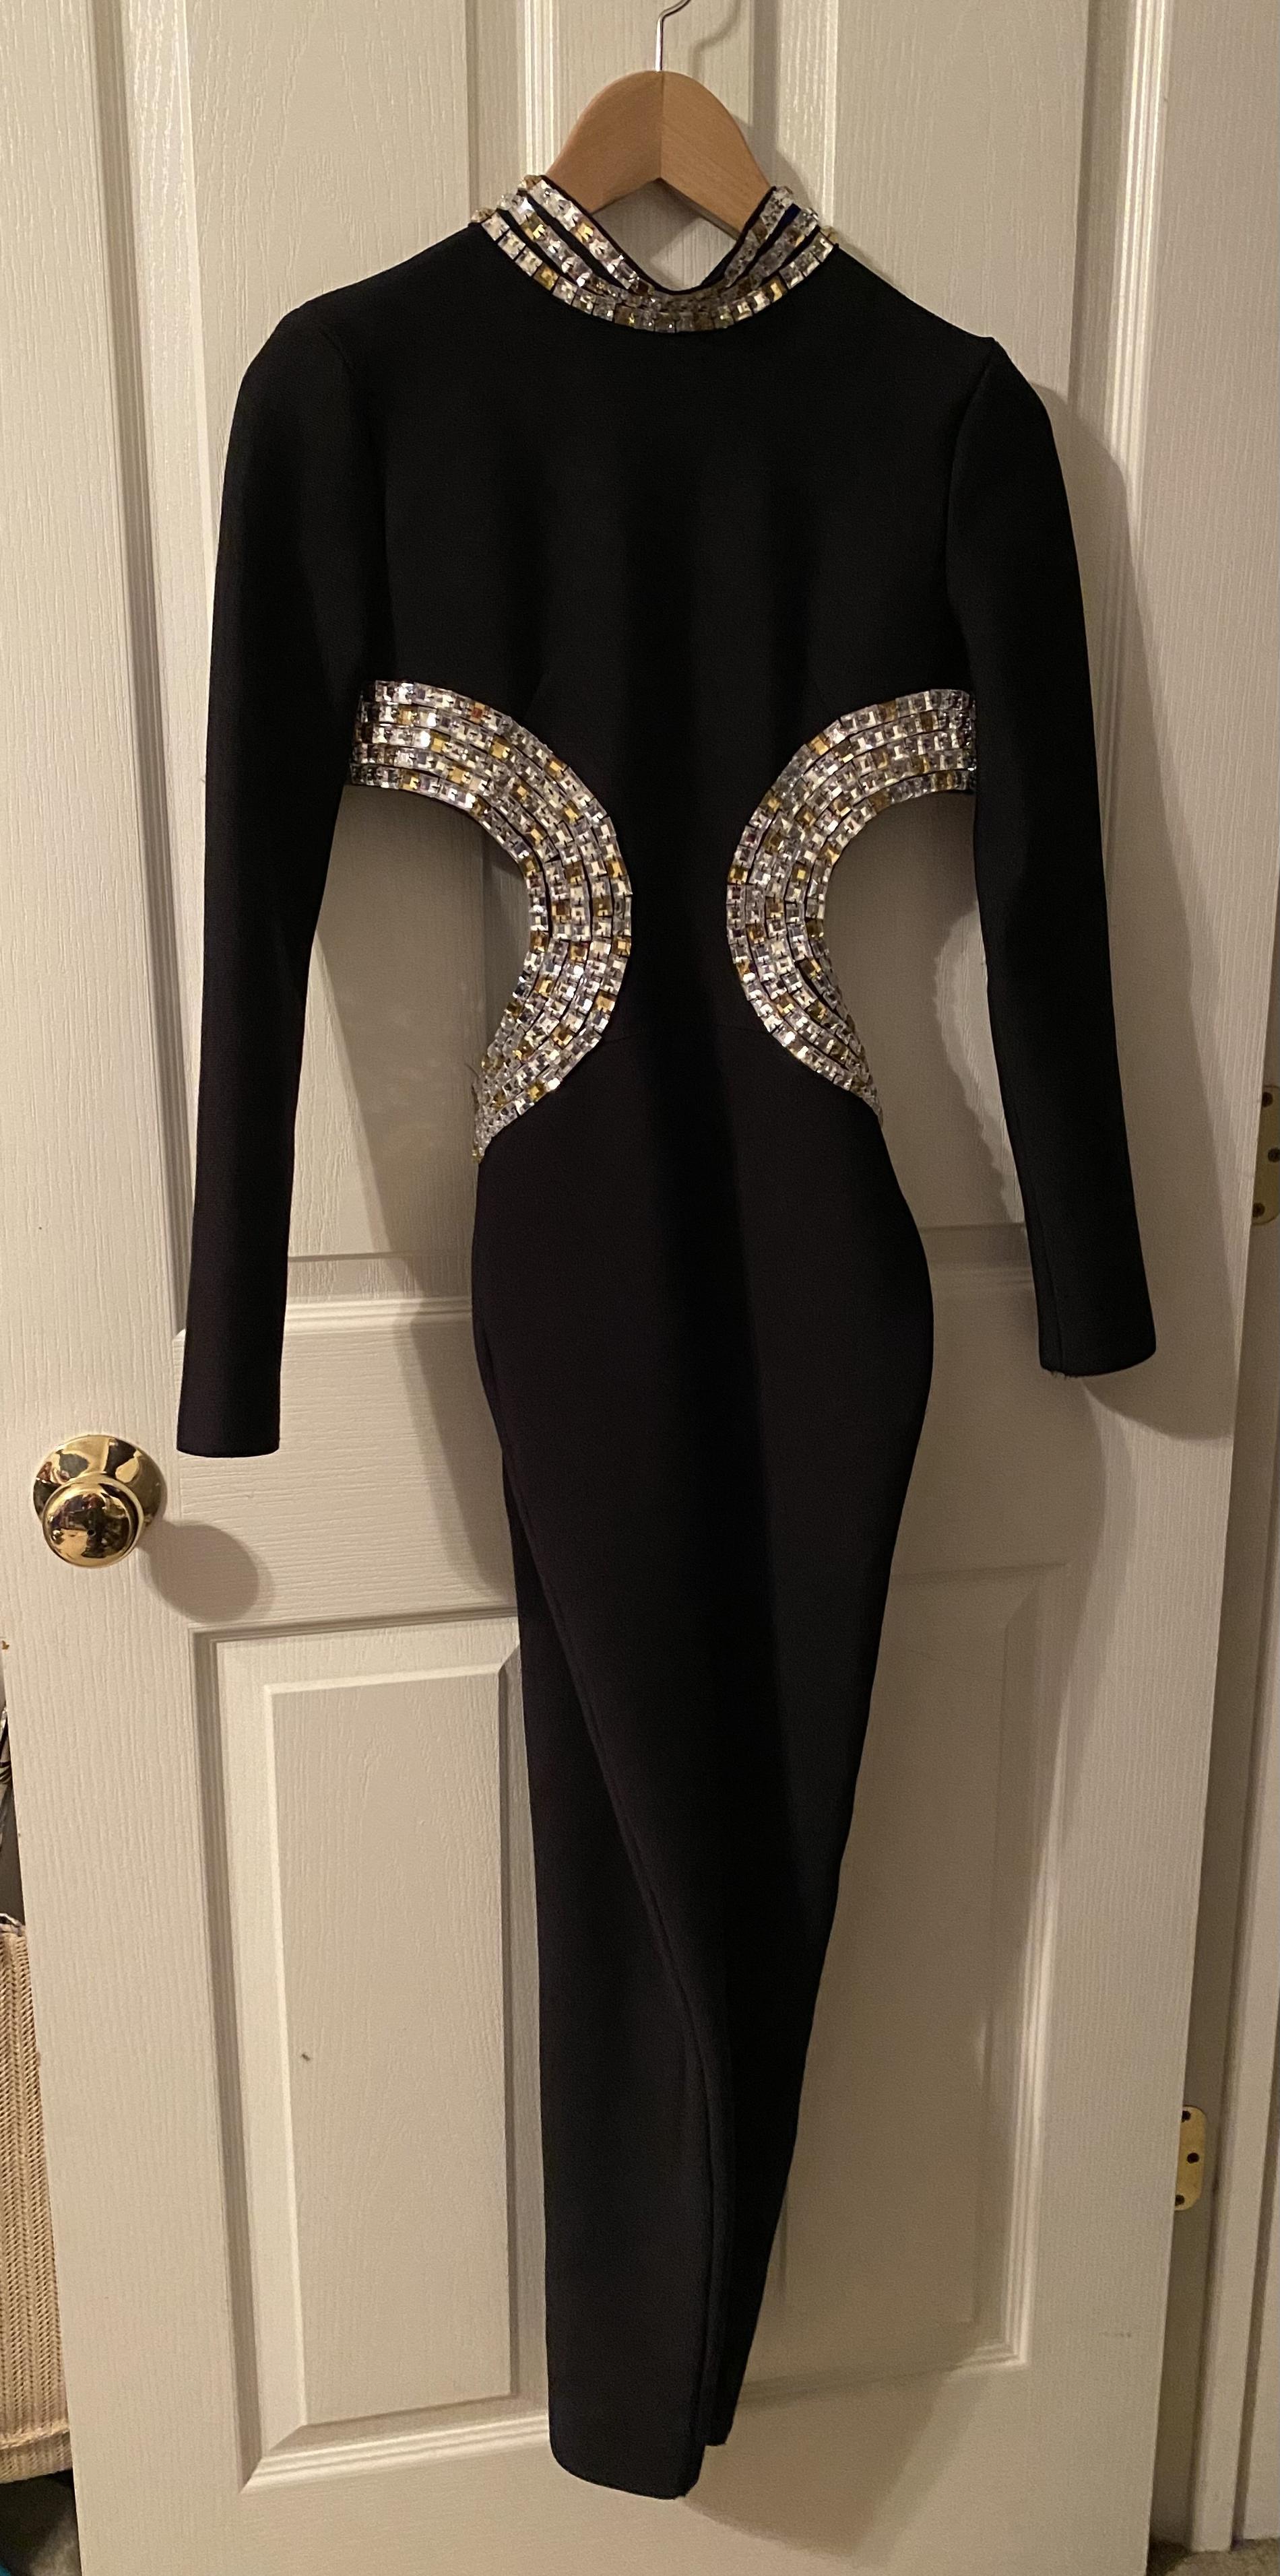 Pinkapple Dress Size 12 Long Sleeve Sequined Black Formal Jumpsuit on Queenly